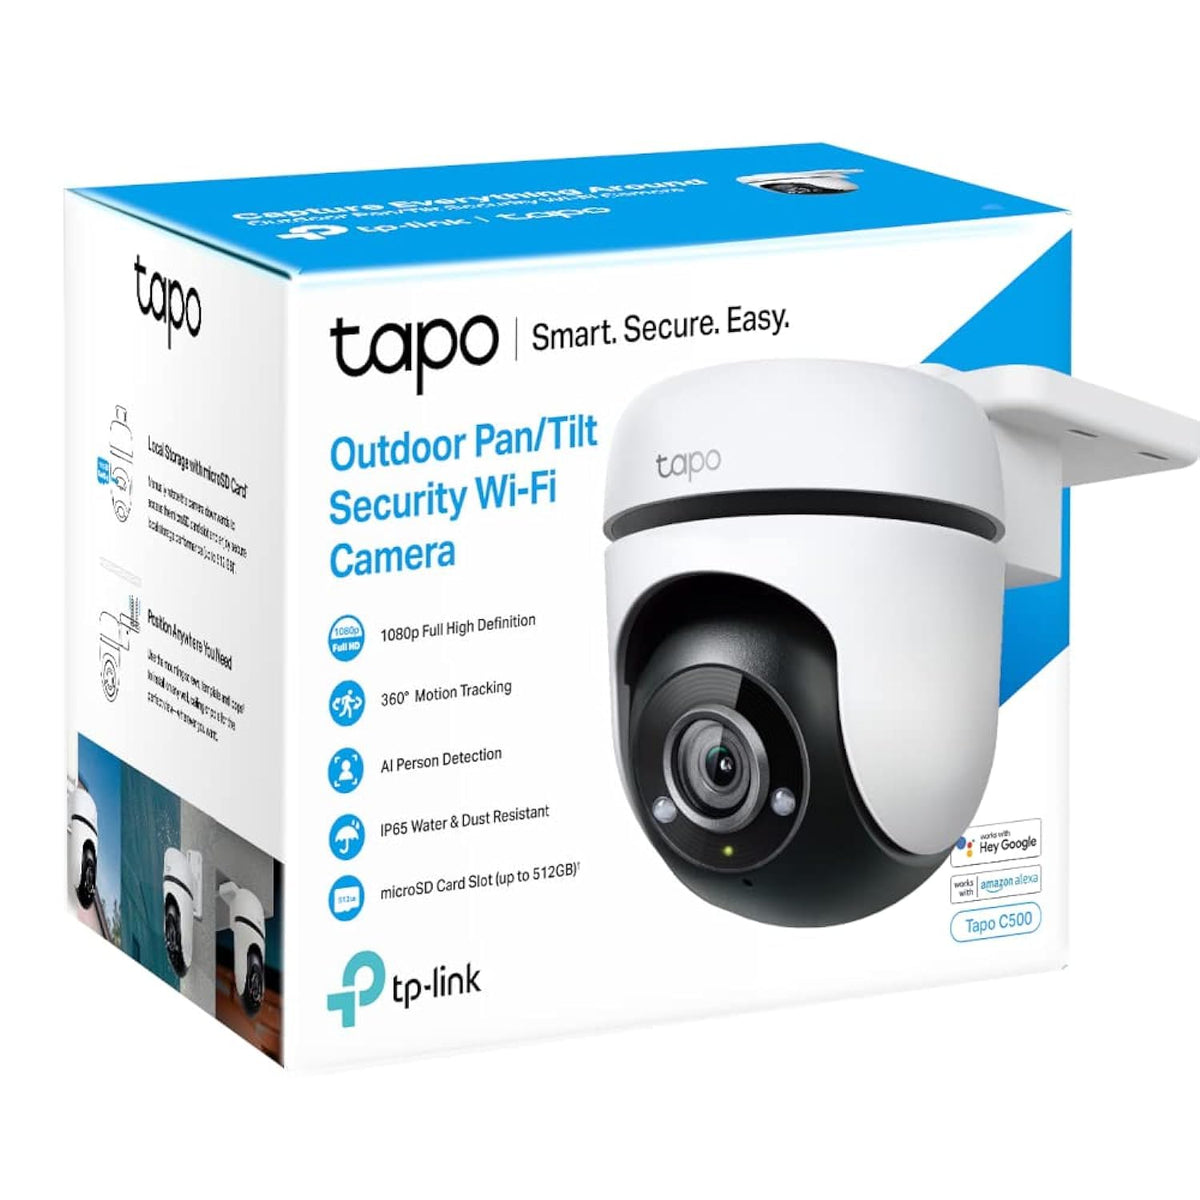 Introducing our latest model the Tapo C220 to the Tapo family. See better  with our newest 2K 4MP camera sensor powered by Smart Al…